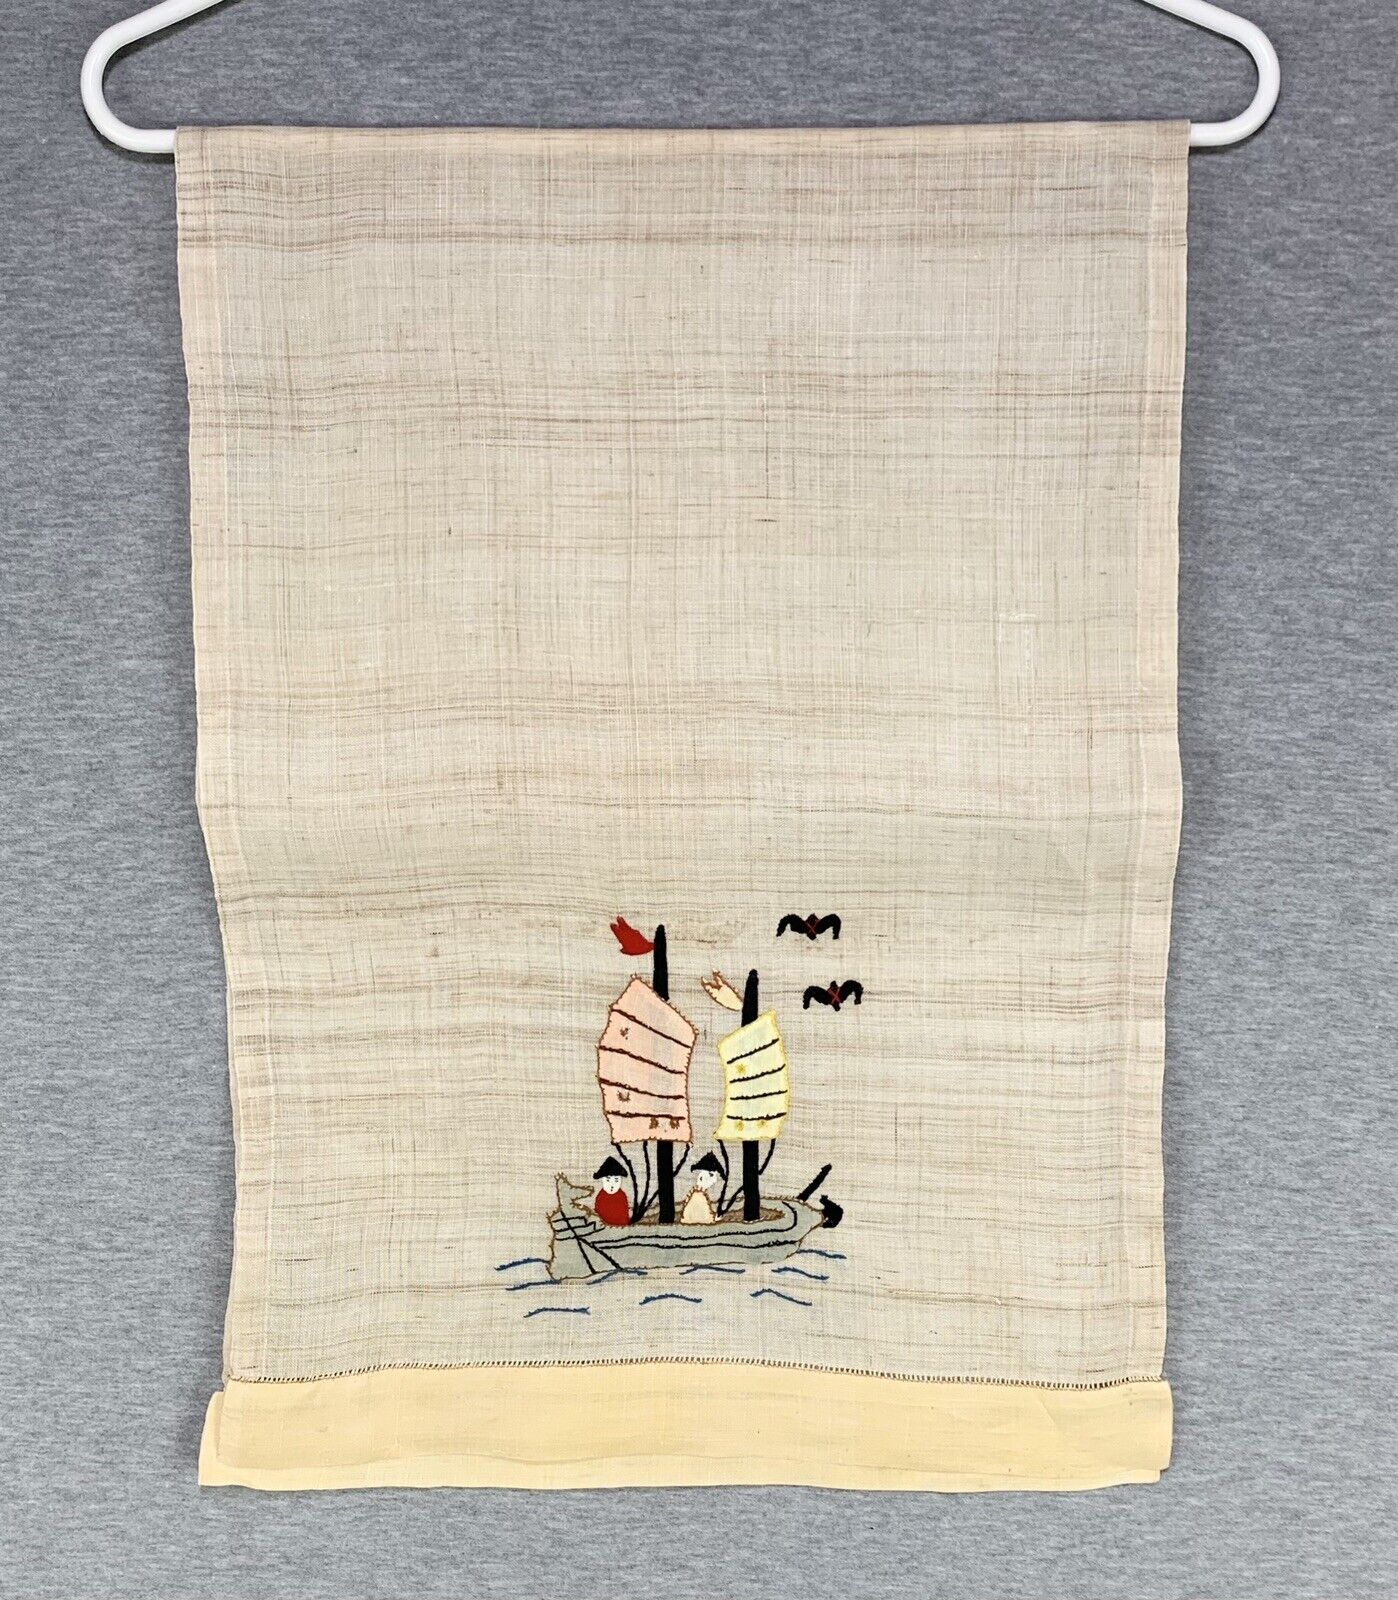 Large Vintage Asian Hand Embroidered Linen Dish Tea Towel 40.5” x 14.5” Boat